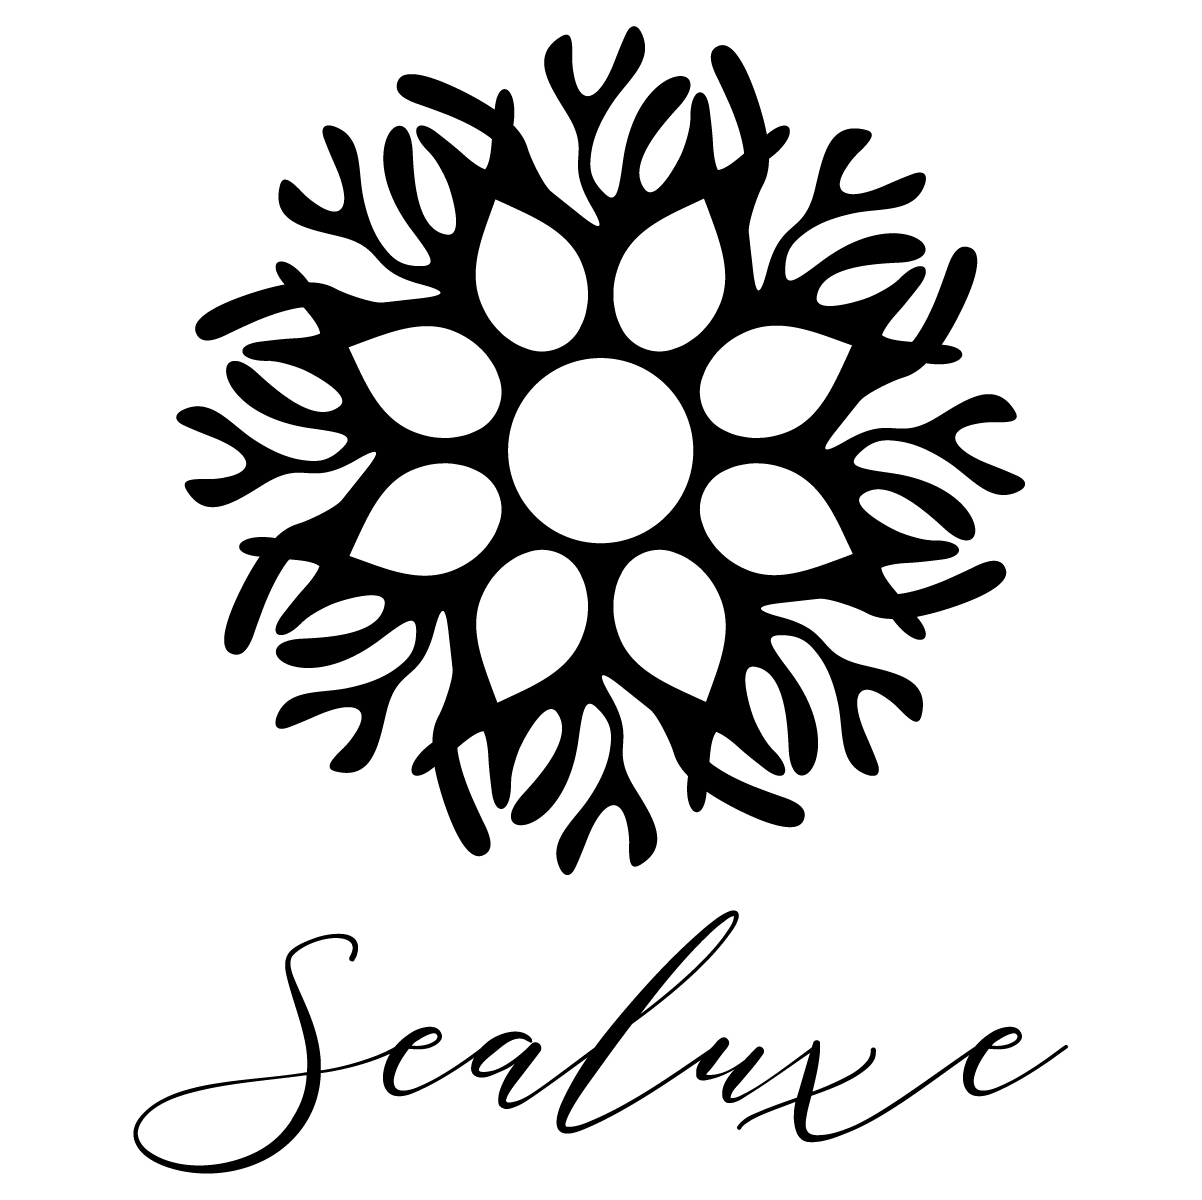 SeaLuxe Skincare Products